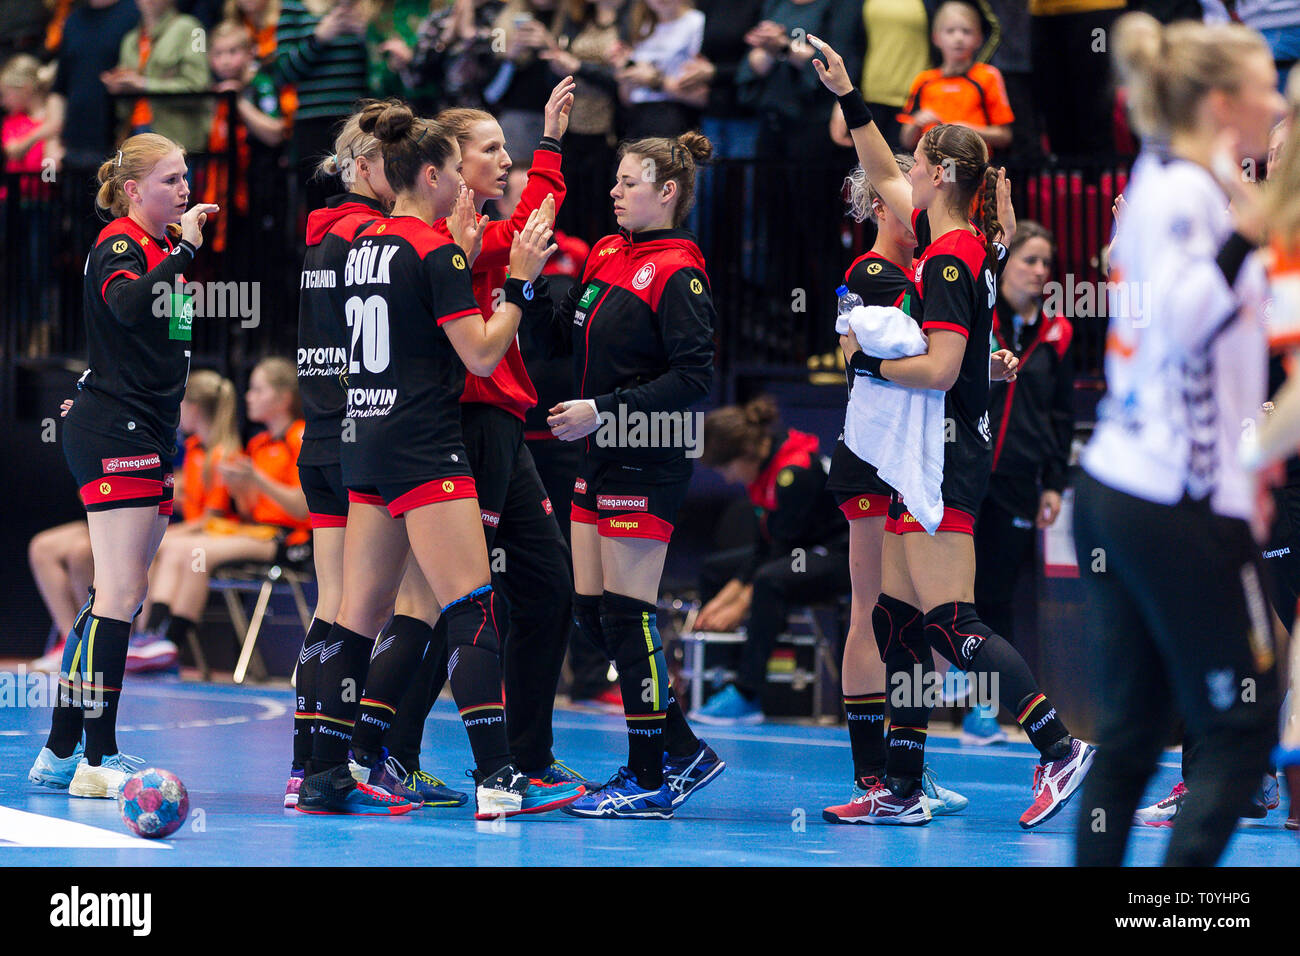 Groningen, Netherlands. 22nd Mar, 2019. Handball, women: international, Netherlands - Germany: Germany's team from Germany at the end of the match. Credit: Marco Wolf/wolf-sportfoto/dpa/Alamy Live News Stock Photo